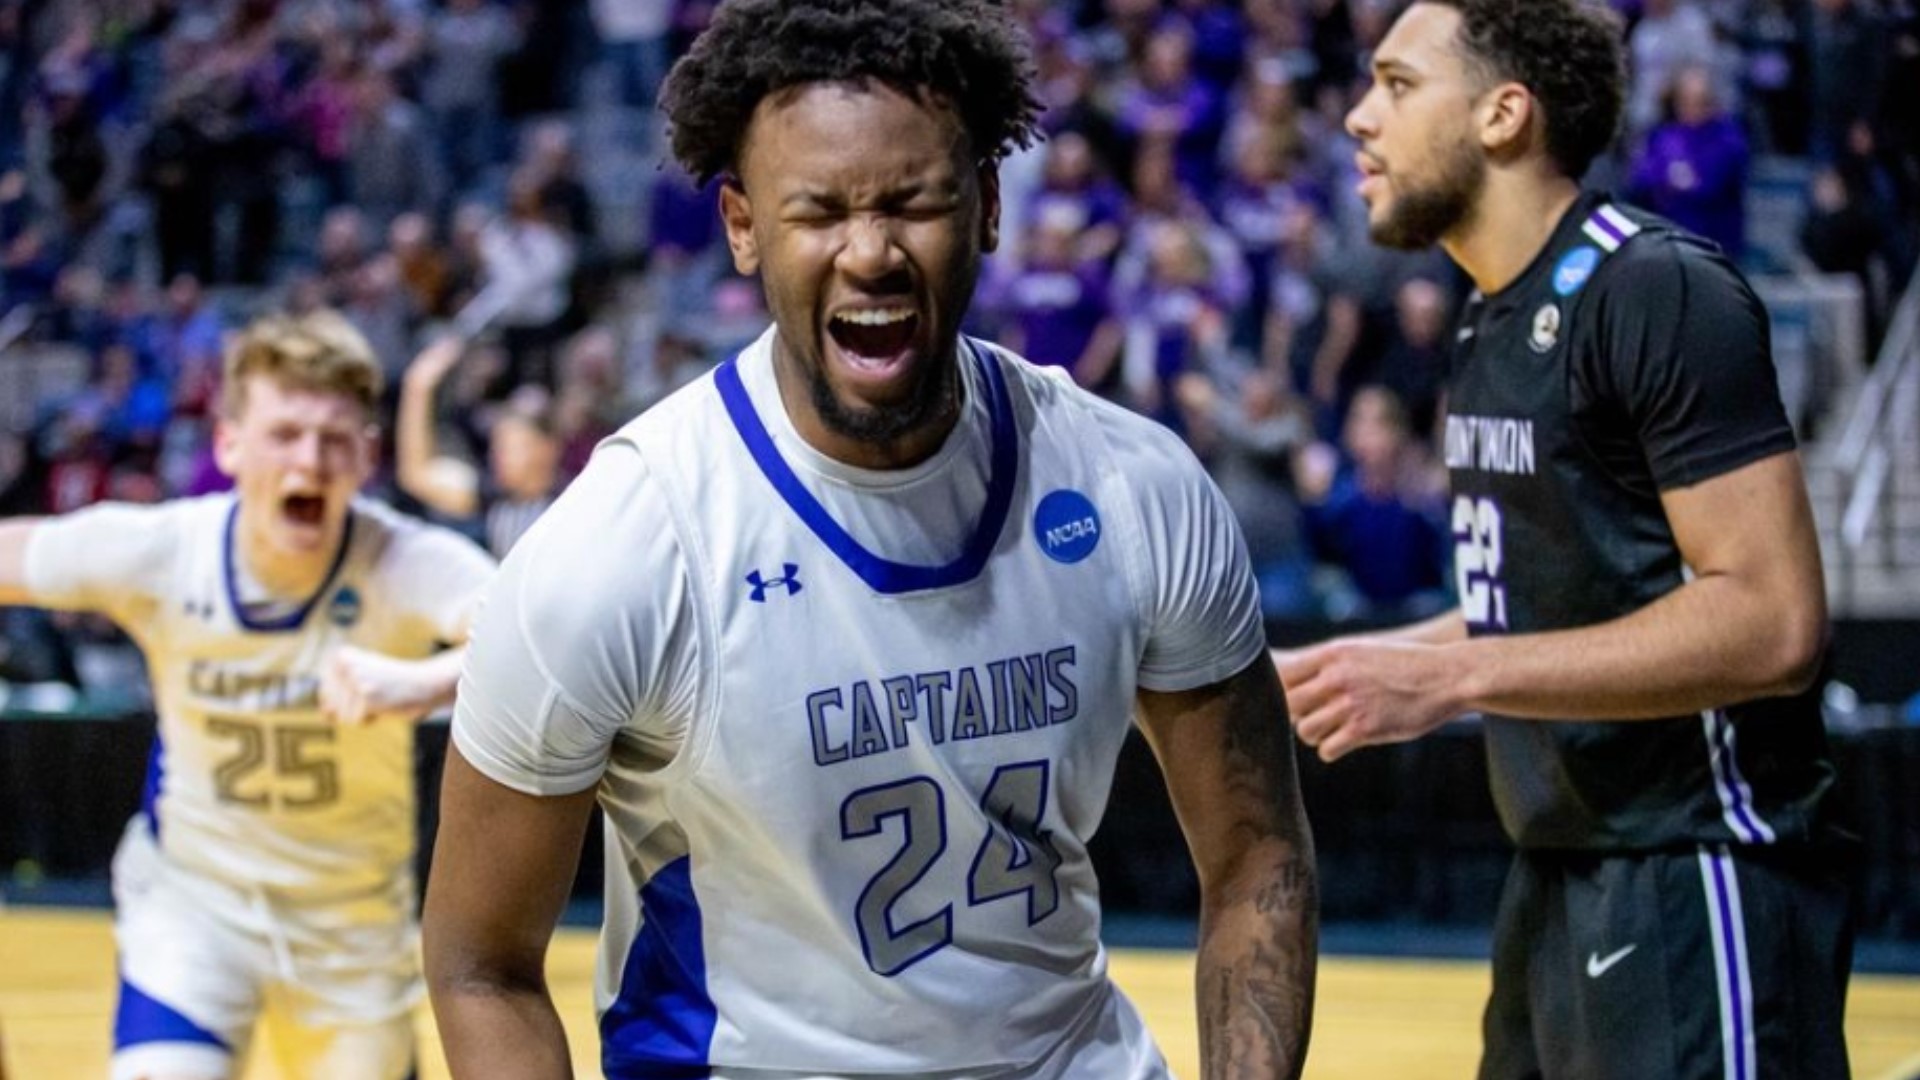 CNU's first trip to the National Championship game will be remembered as a classic, as junior Trey Barber scored on a driving layup as time expired.